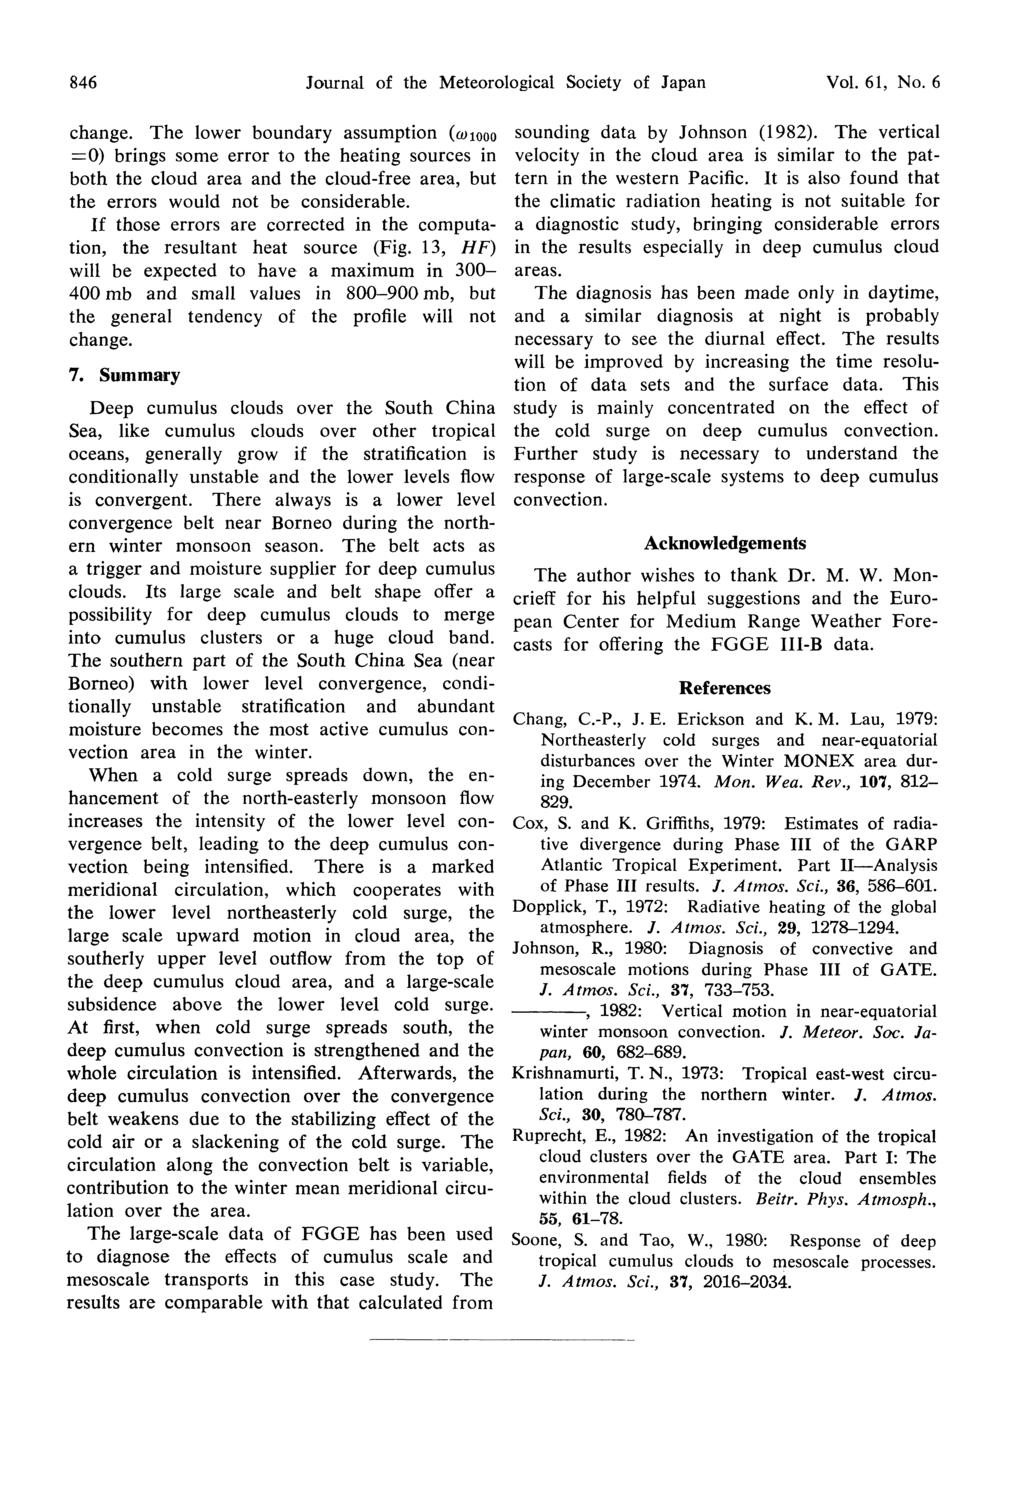 846 Journal of the Meteorological Society of Japan Vol. 61, No. 6 change.